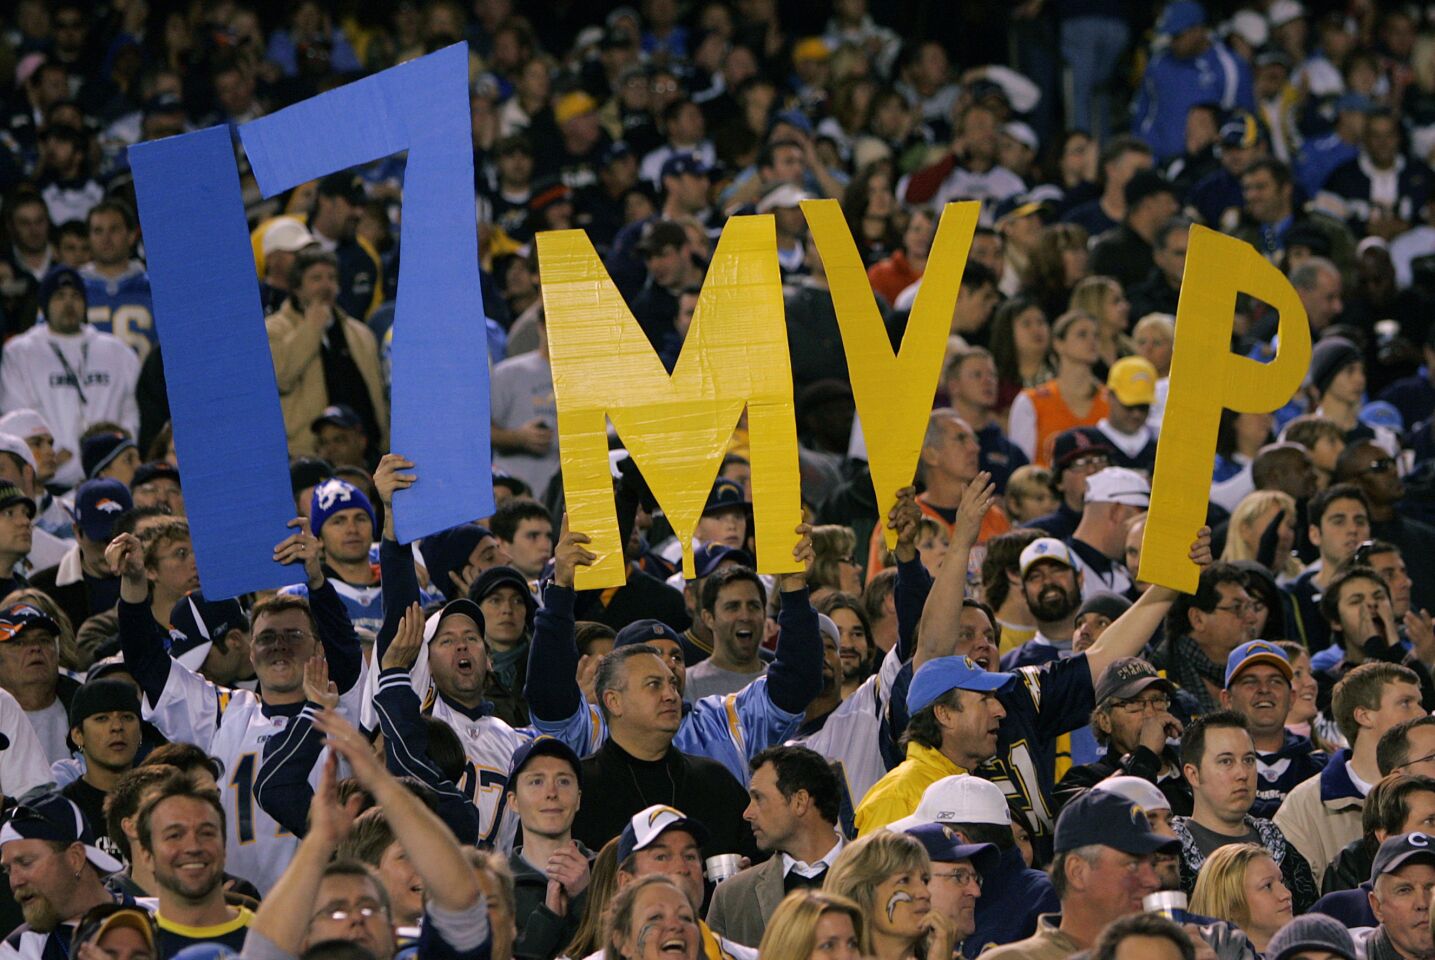 Fans of the San Diego Chargers hold up a sign for Philip Rivers for MVP against the Denver Broncos at Qualcomm Stadium on Sunday, Dec. 28, 2008.